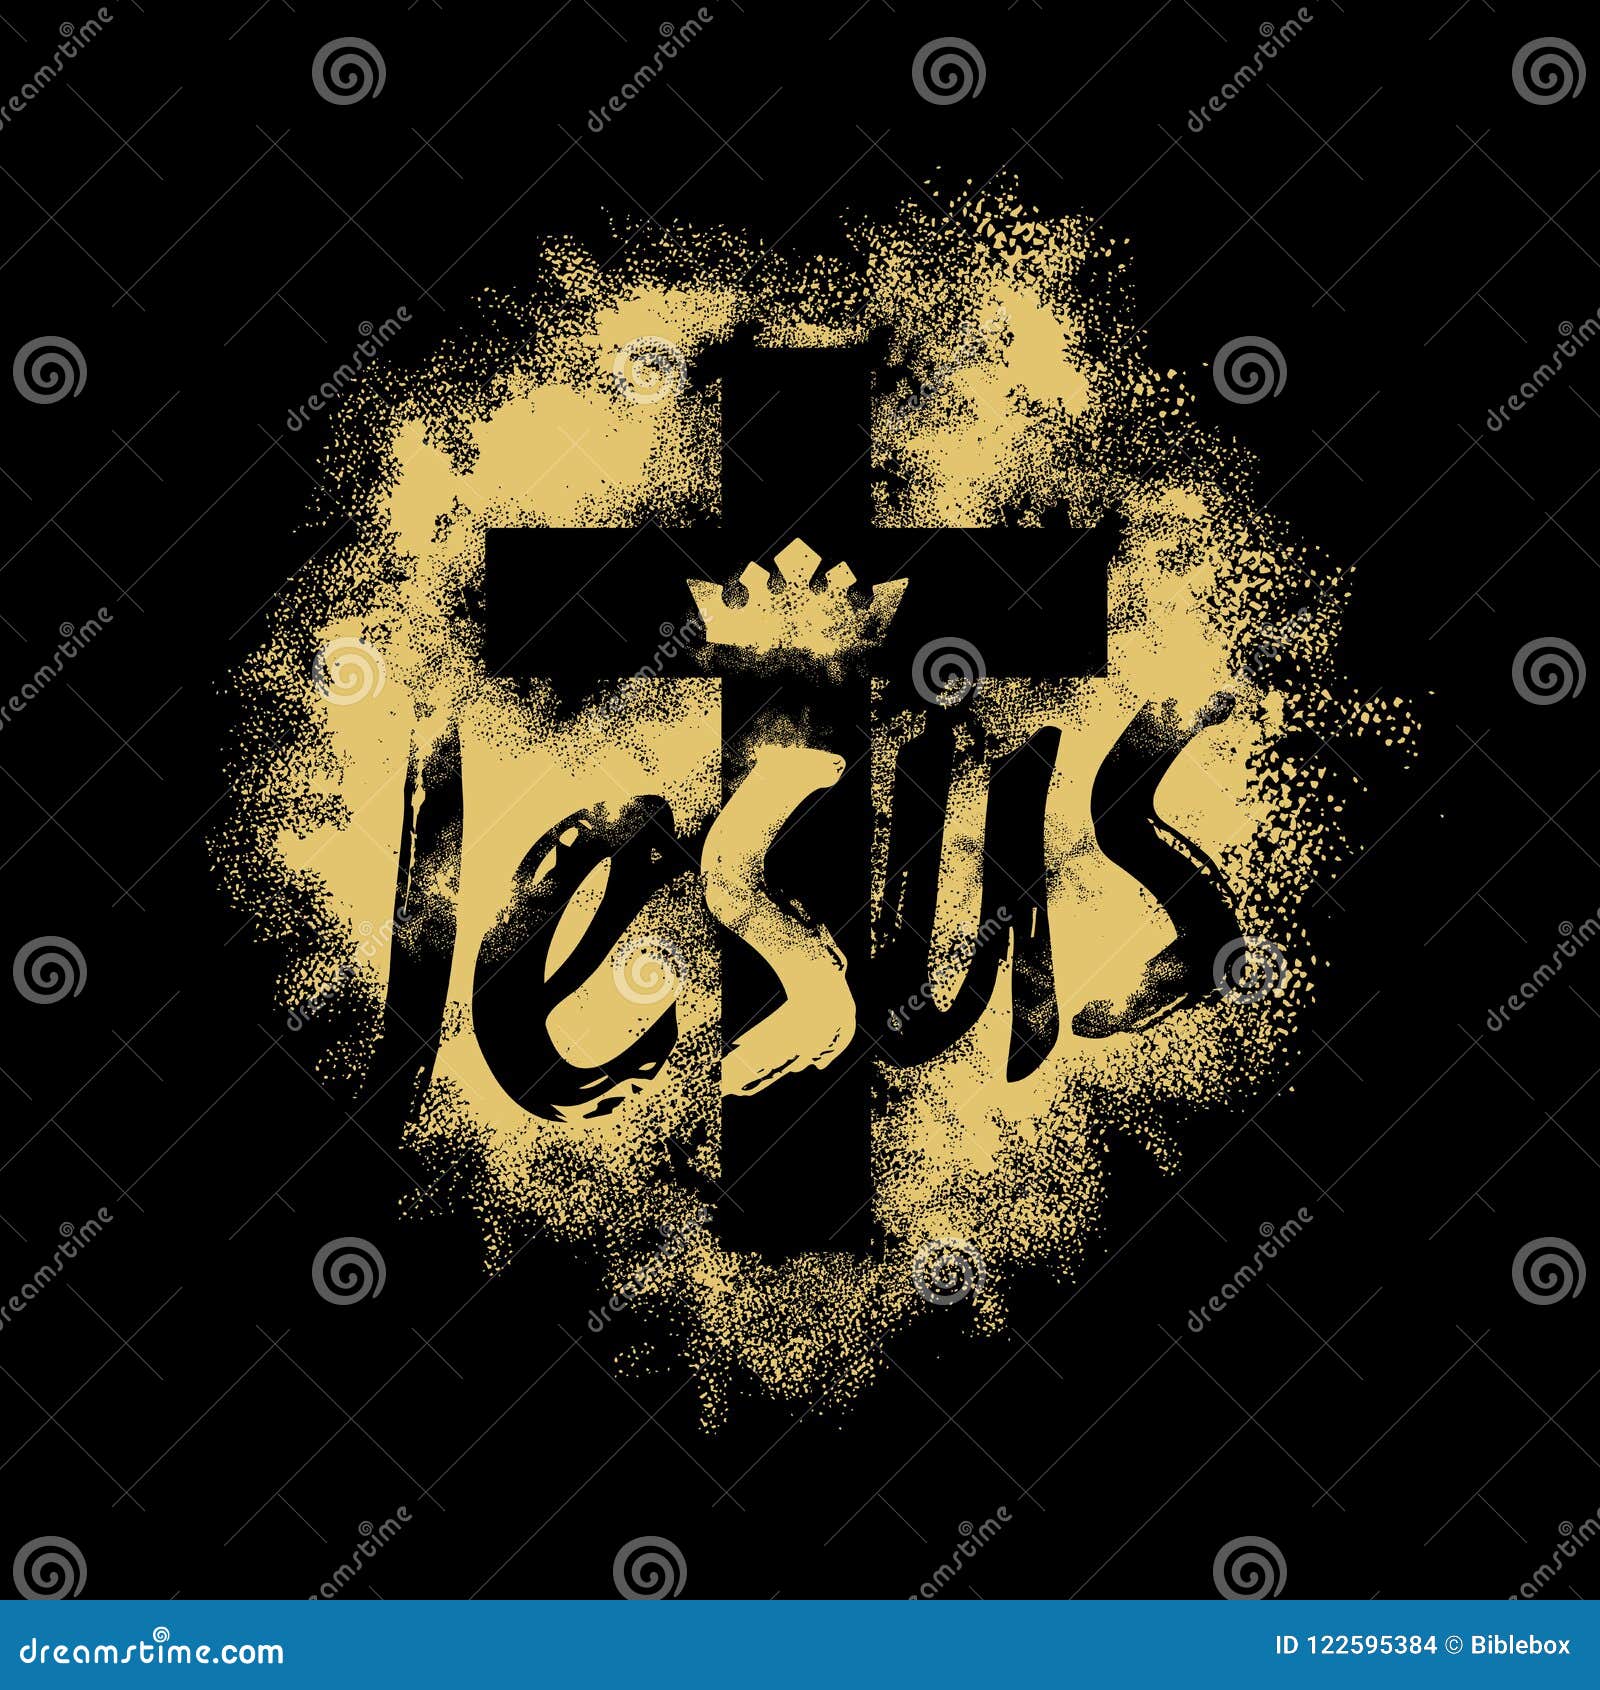 Bible Lettering. Christian Art. Cross Of The Lord And Savior Jesus ...